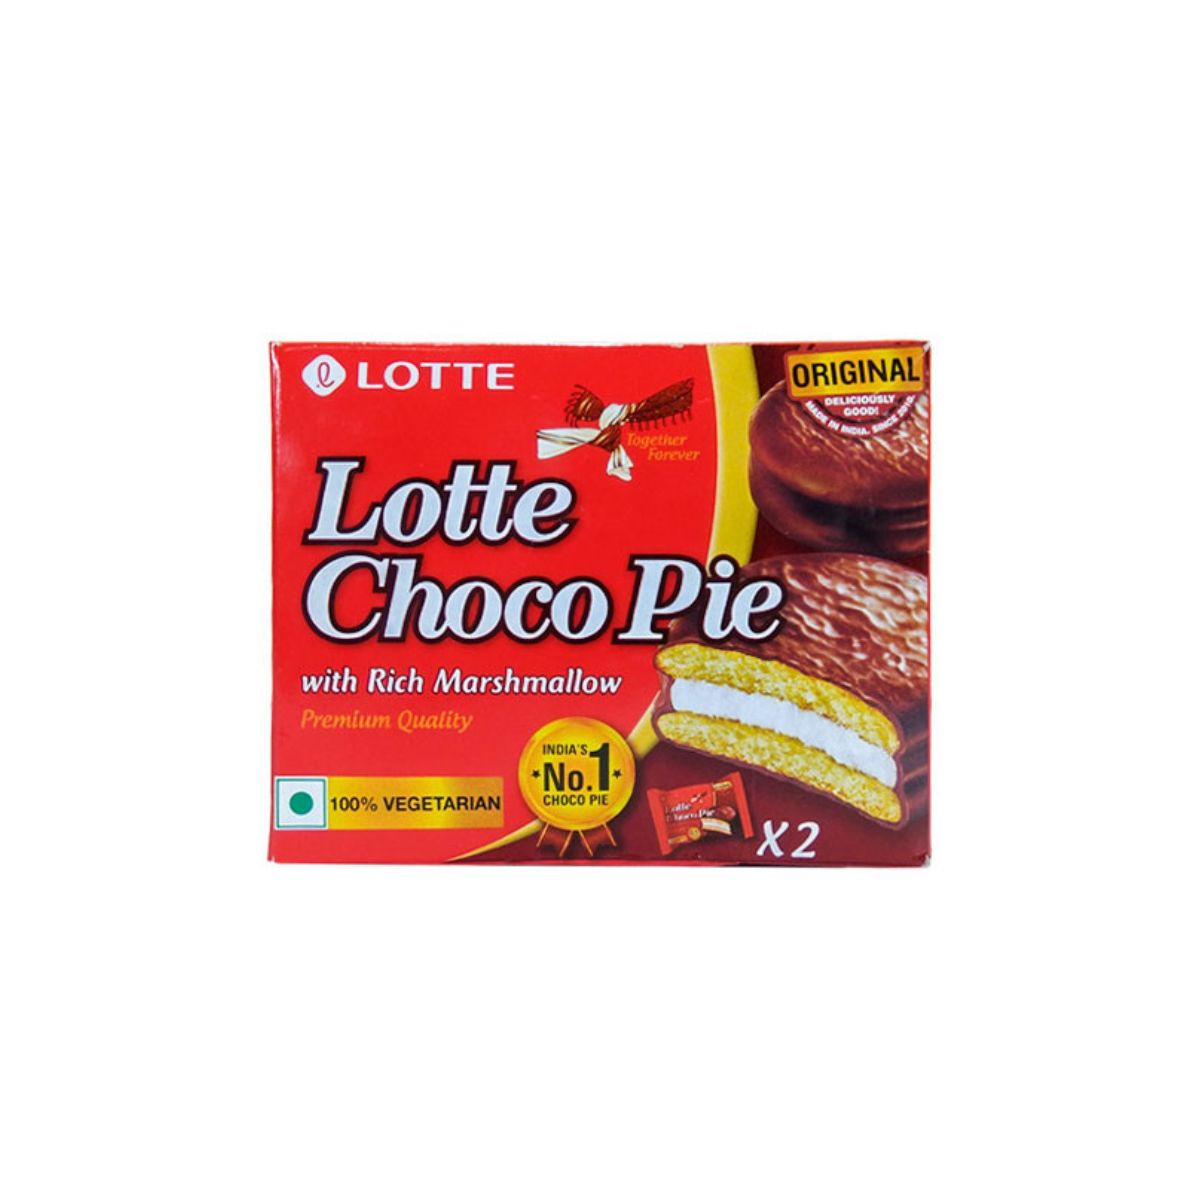 Lotte Choco Pie With Rich Marshmallow - 56g (2 Pcs x 28g Each)